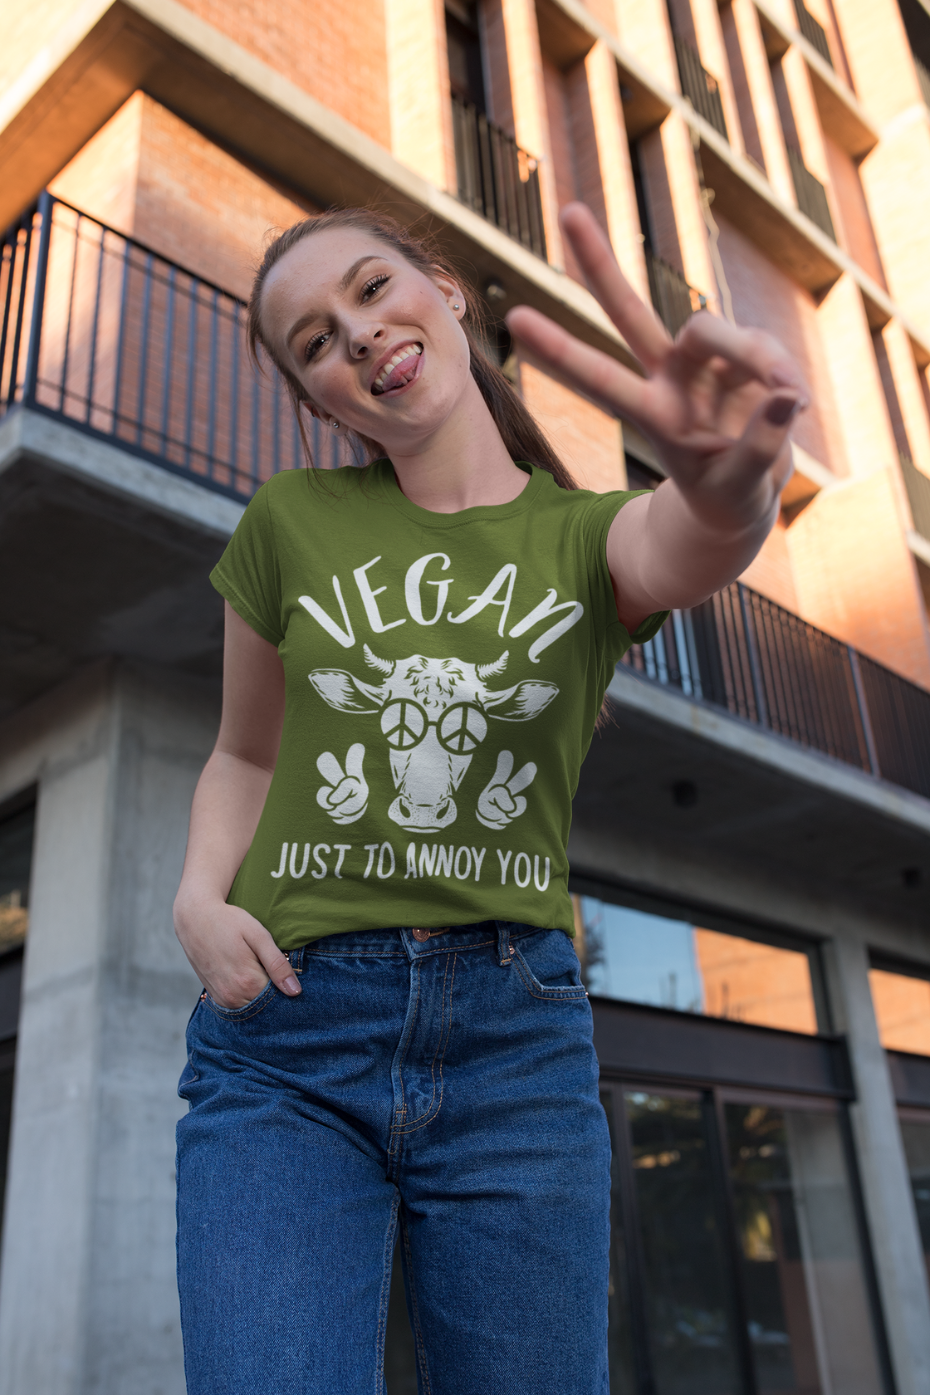 Just To Annoy You - Unisex Vegan T-shirt